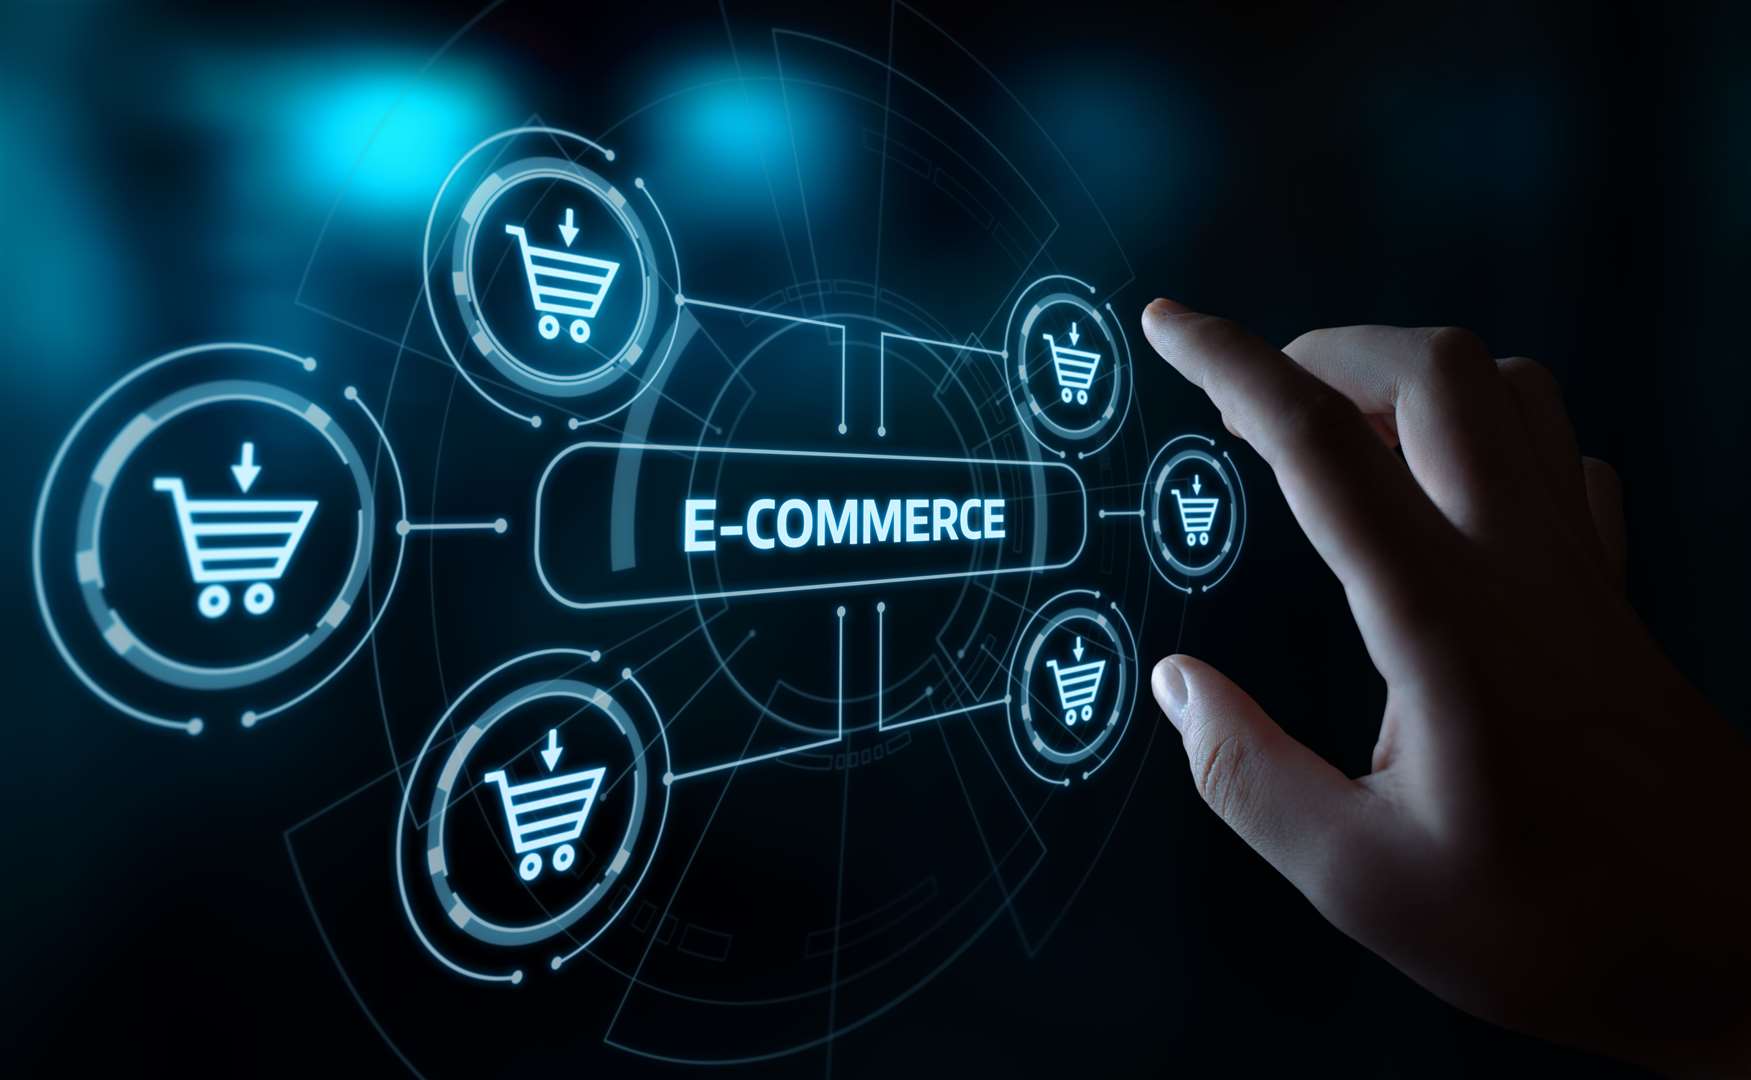 The FSB e-commerce webinar will take place on January 28.